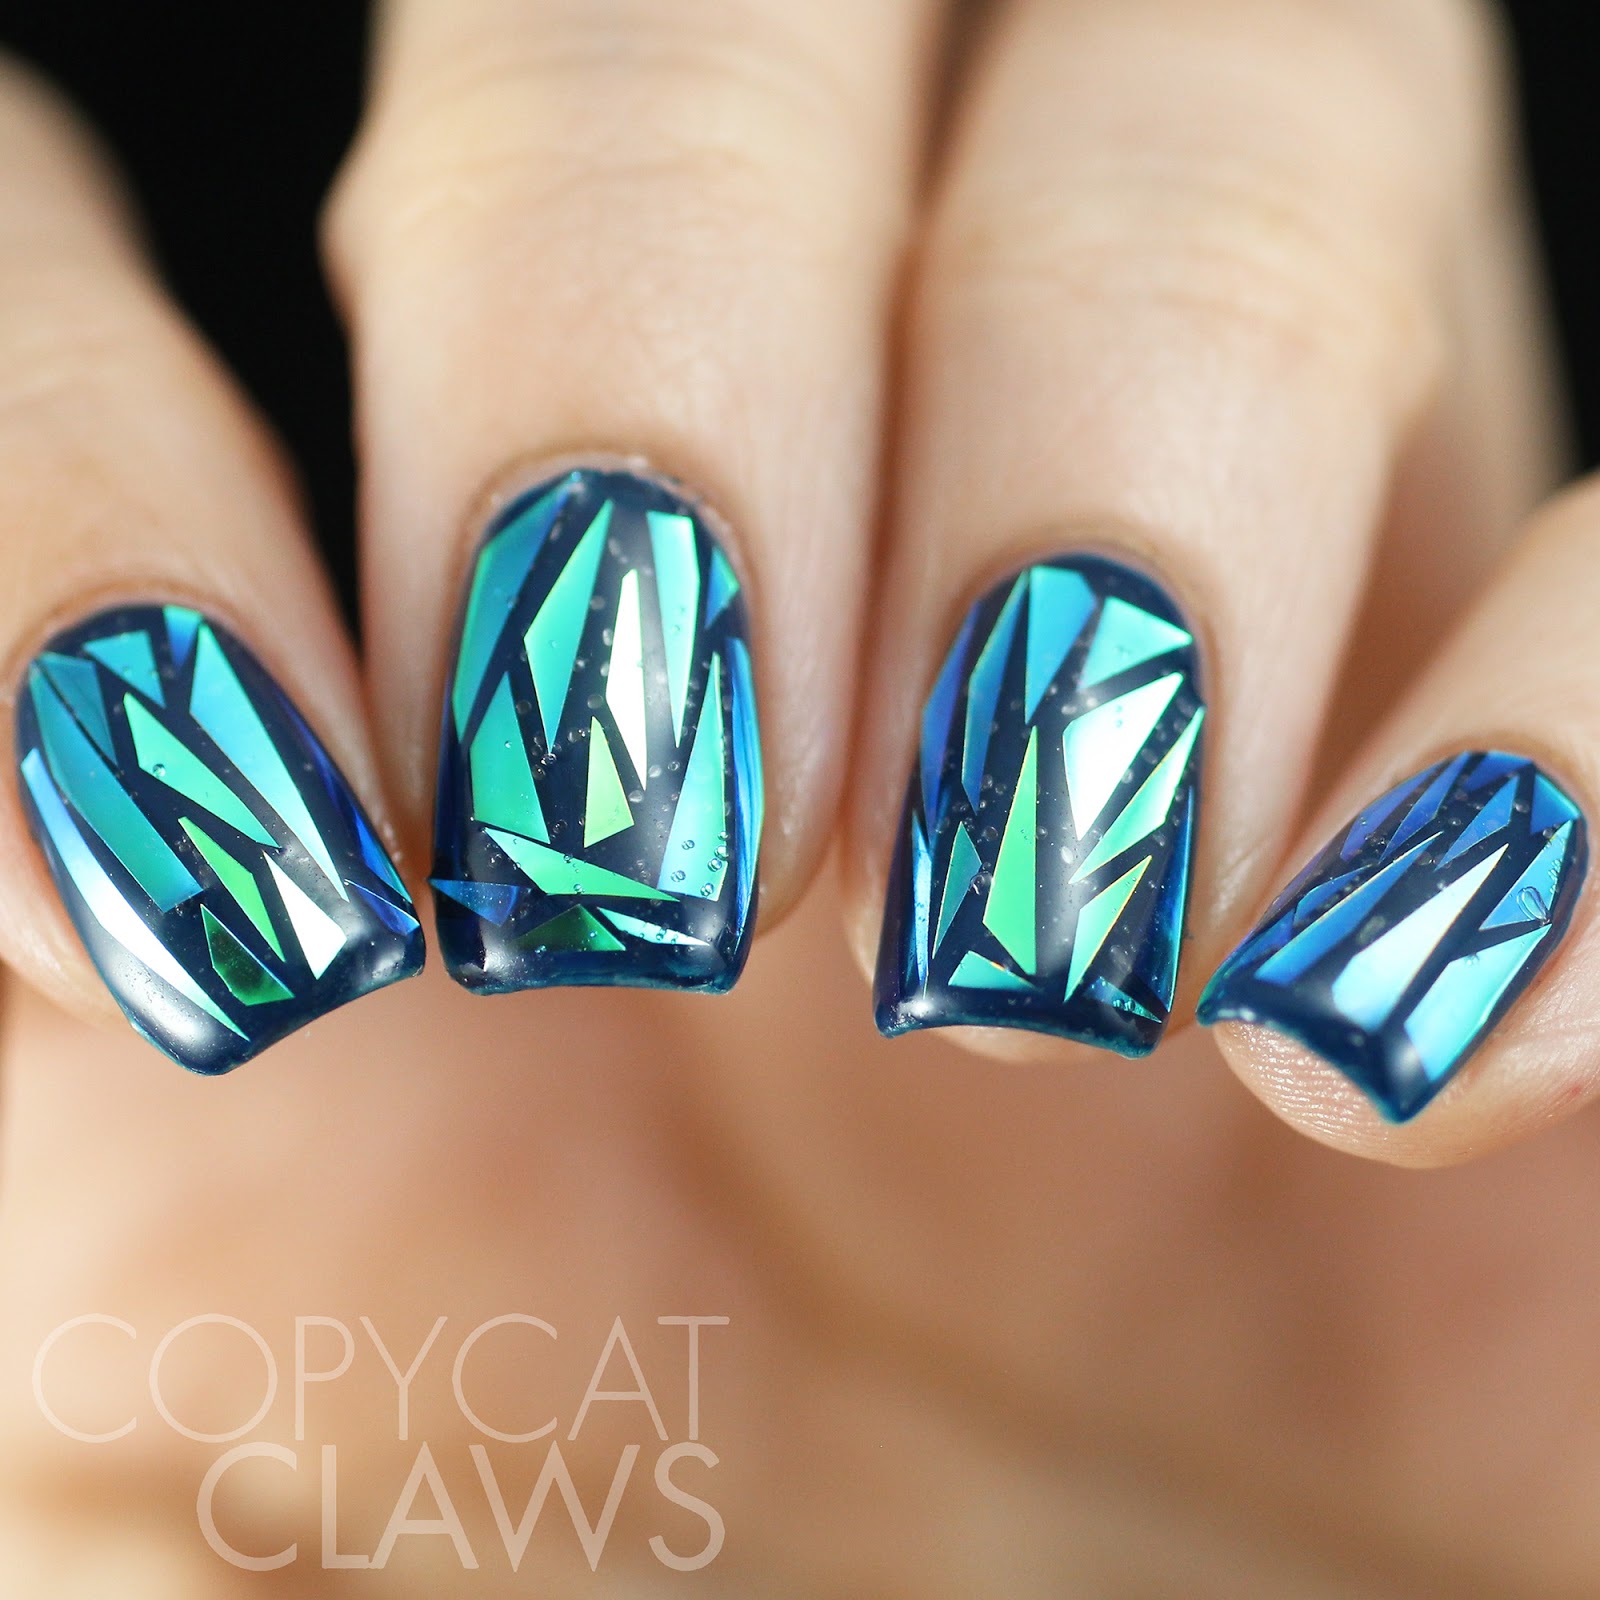 shattered-glass-nails-4